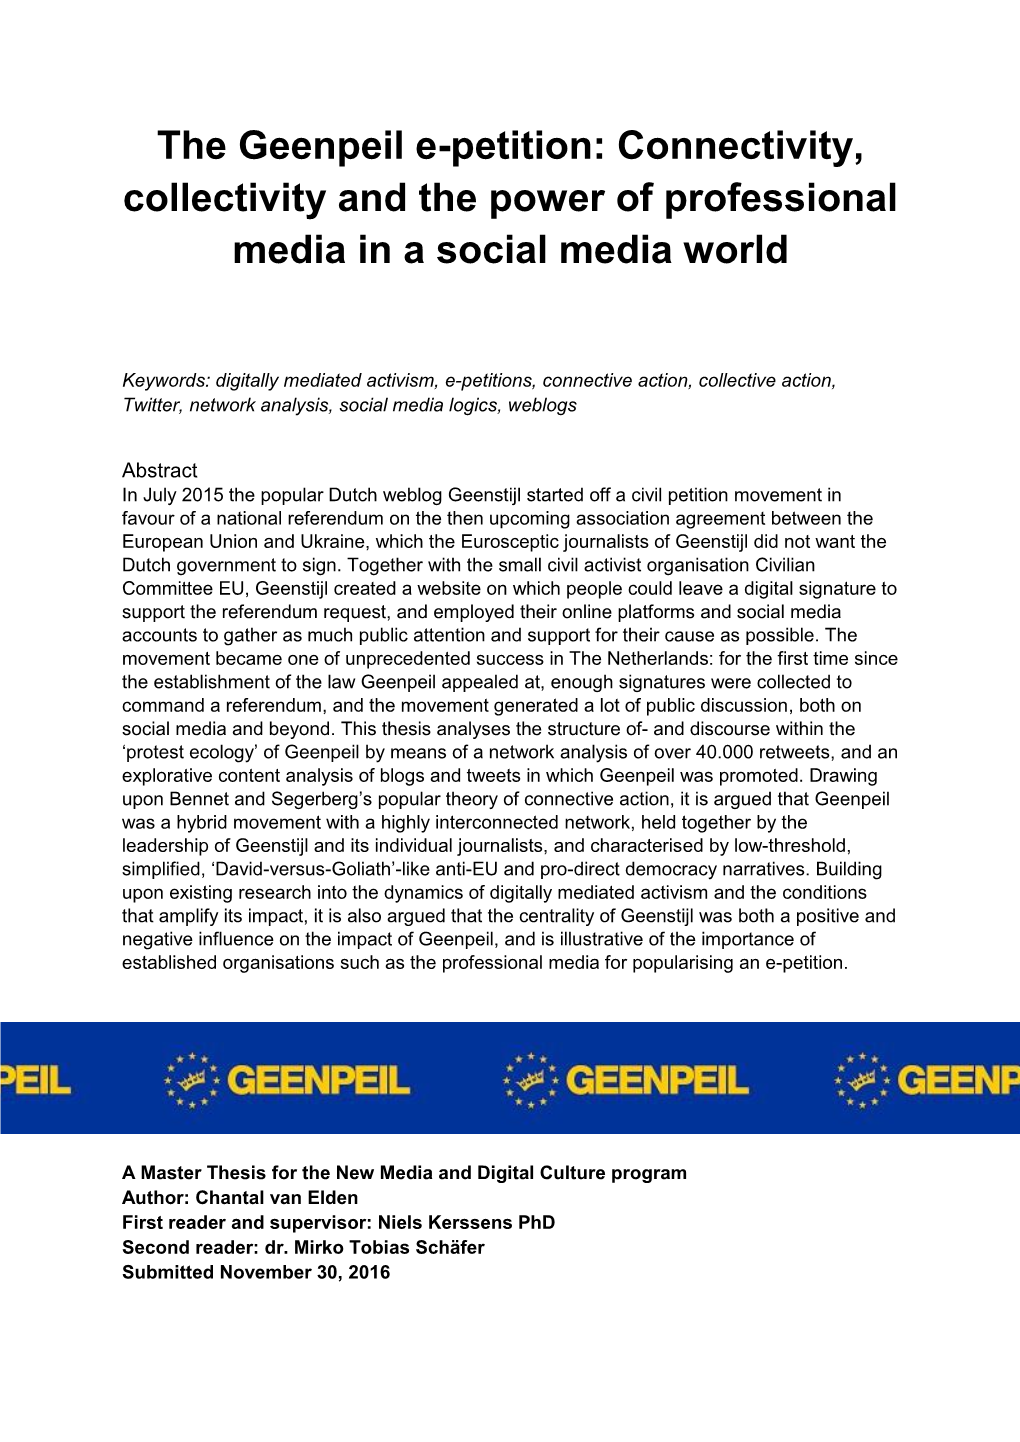 The Geenpeil E-Petition: Connectivity, Collectivity and the Power of Professional Media in a Social Media World